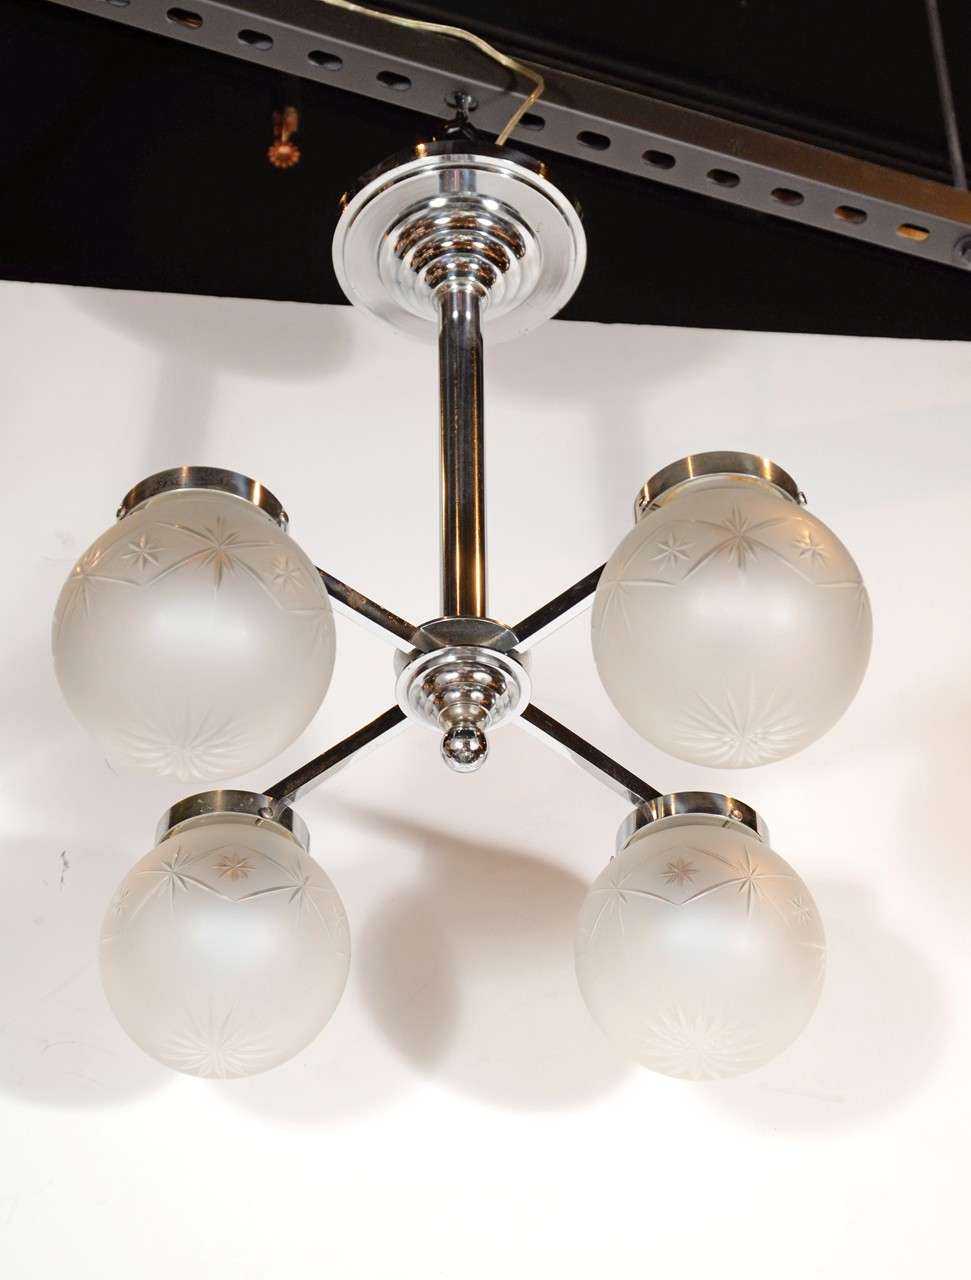 Art Deco chrome chandelier with skyscraper design fitted with four frosted glass globes, featuring etched starburst designs. Newly rewired to American standards. Excellent condition.

France, Circa 1930

Dimensions: 22